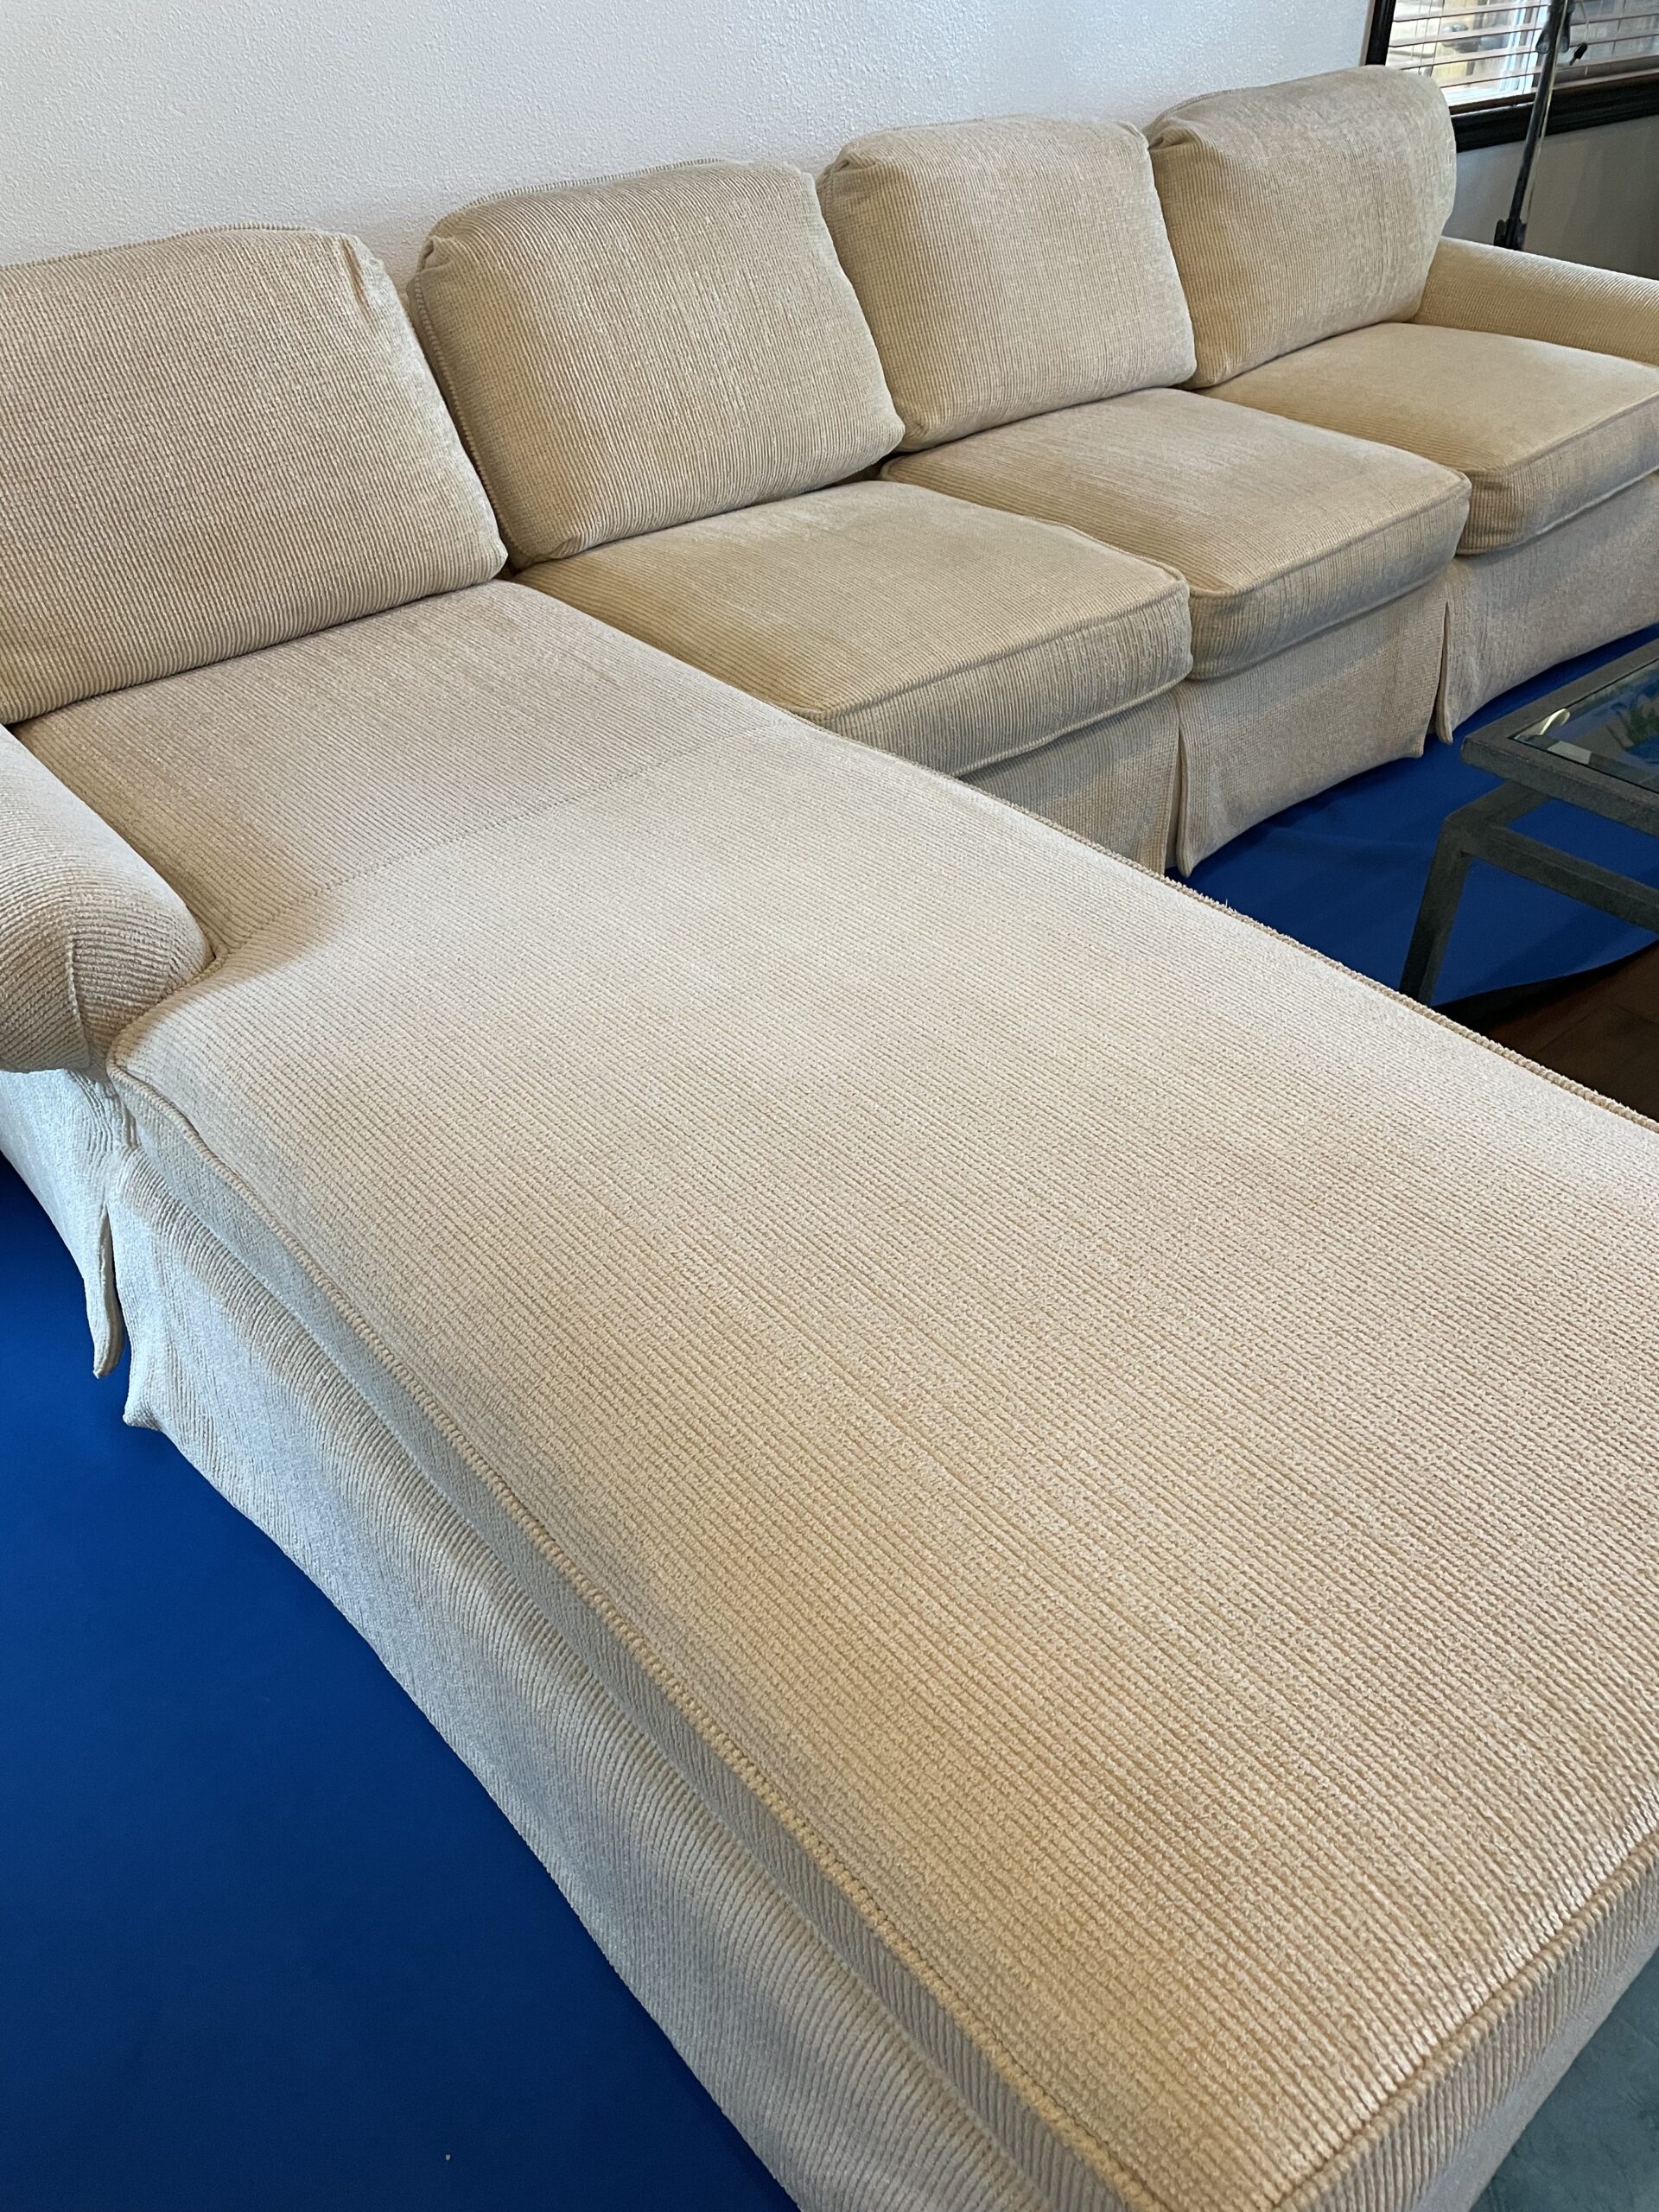 Tustin California Upholstery Cleaning